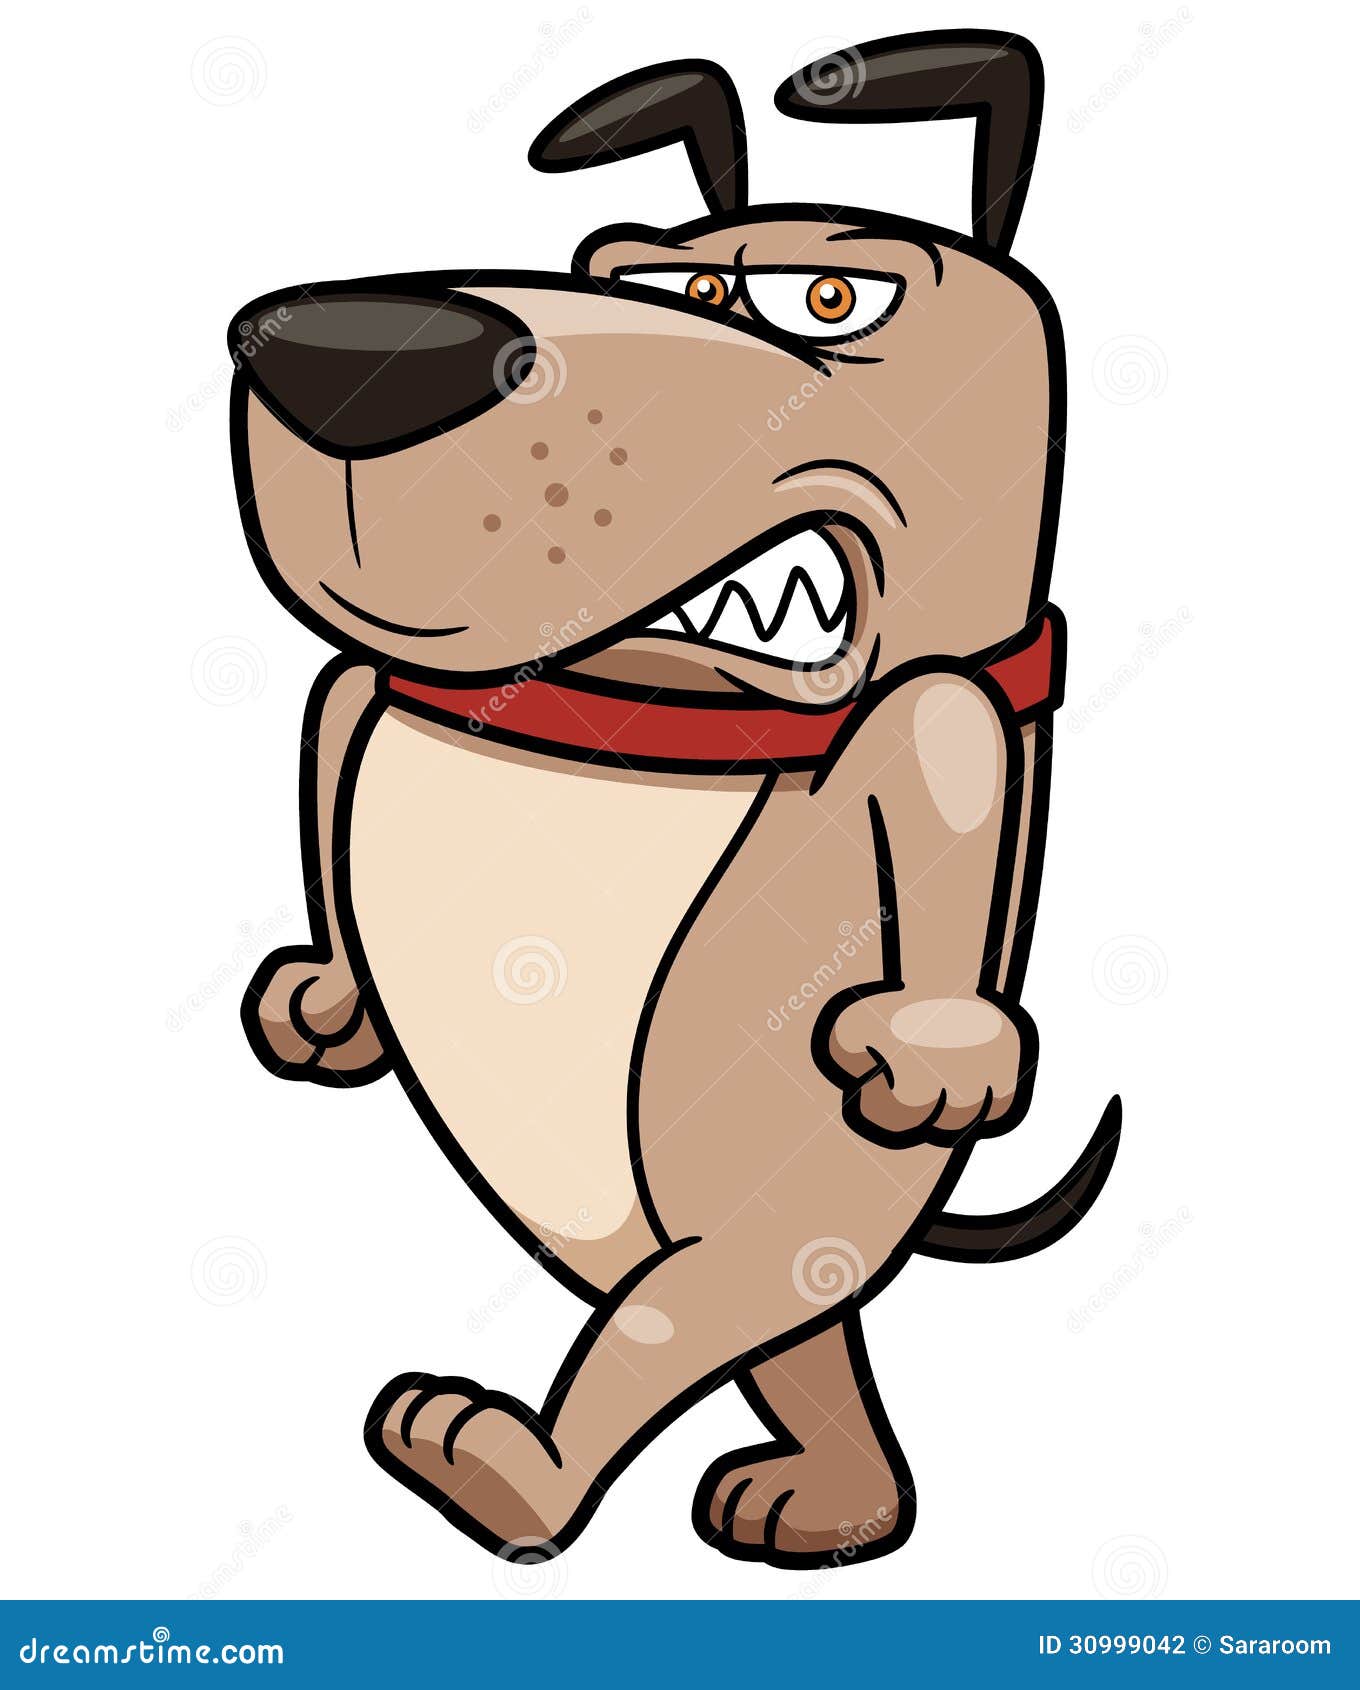 clipart angry dog - photo #30